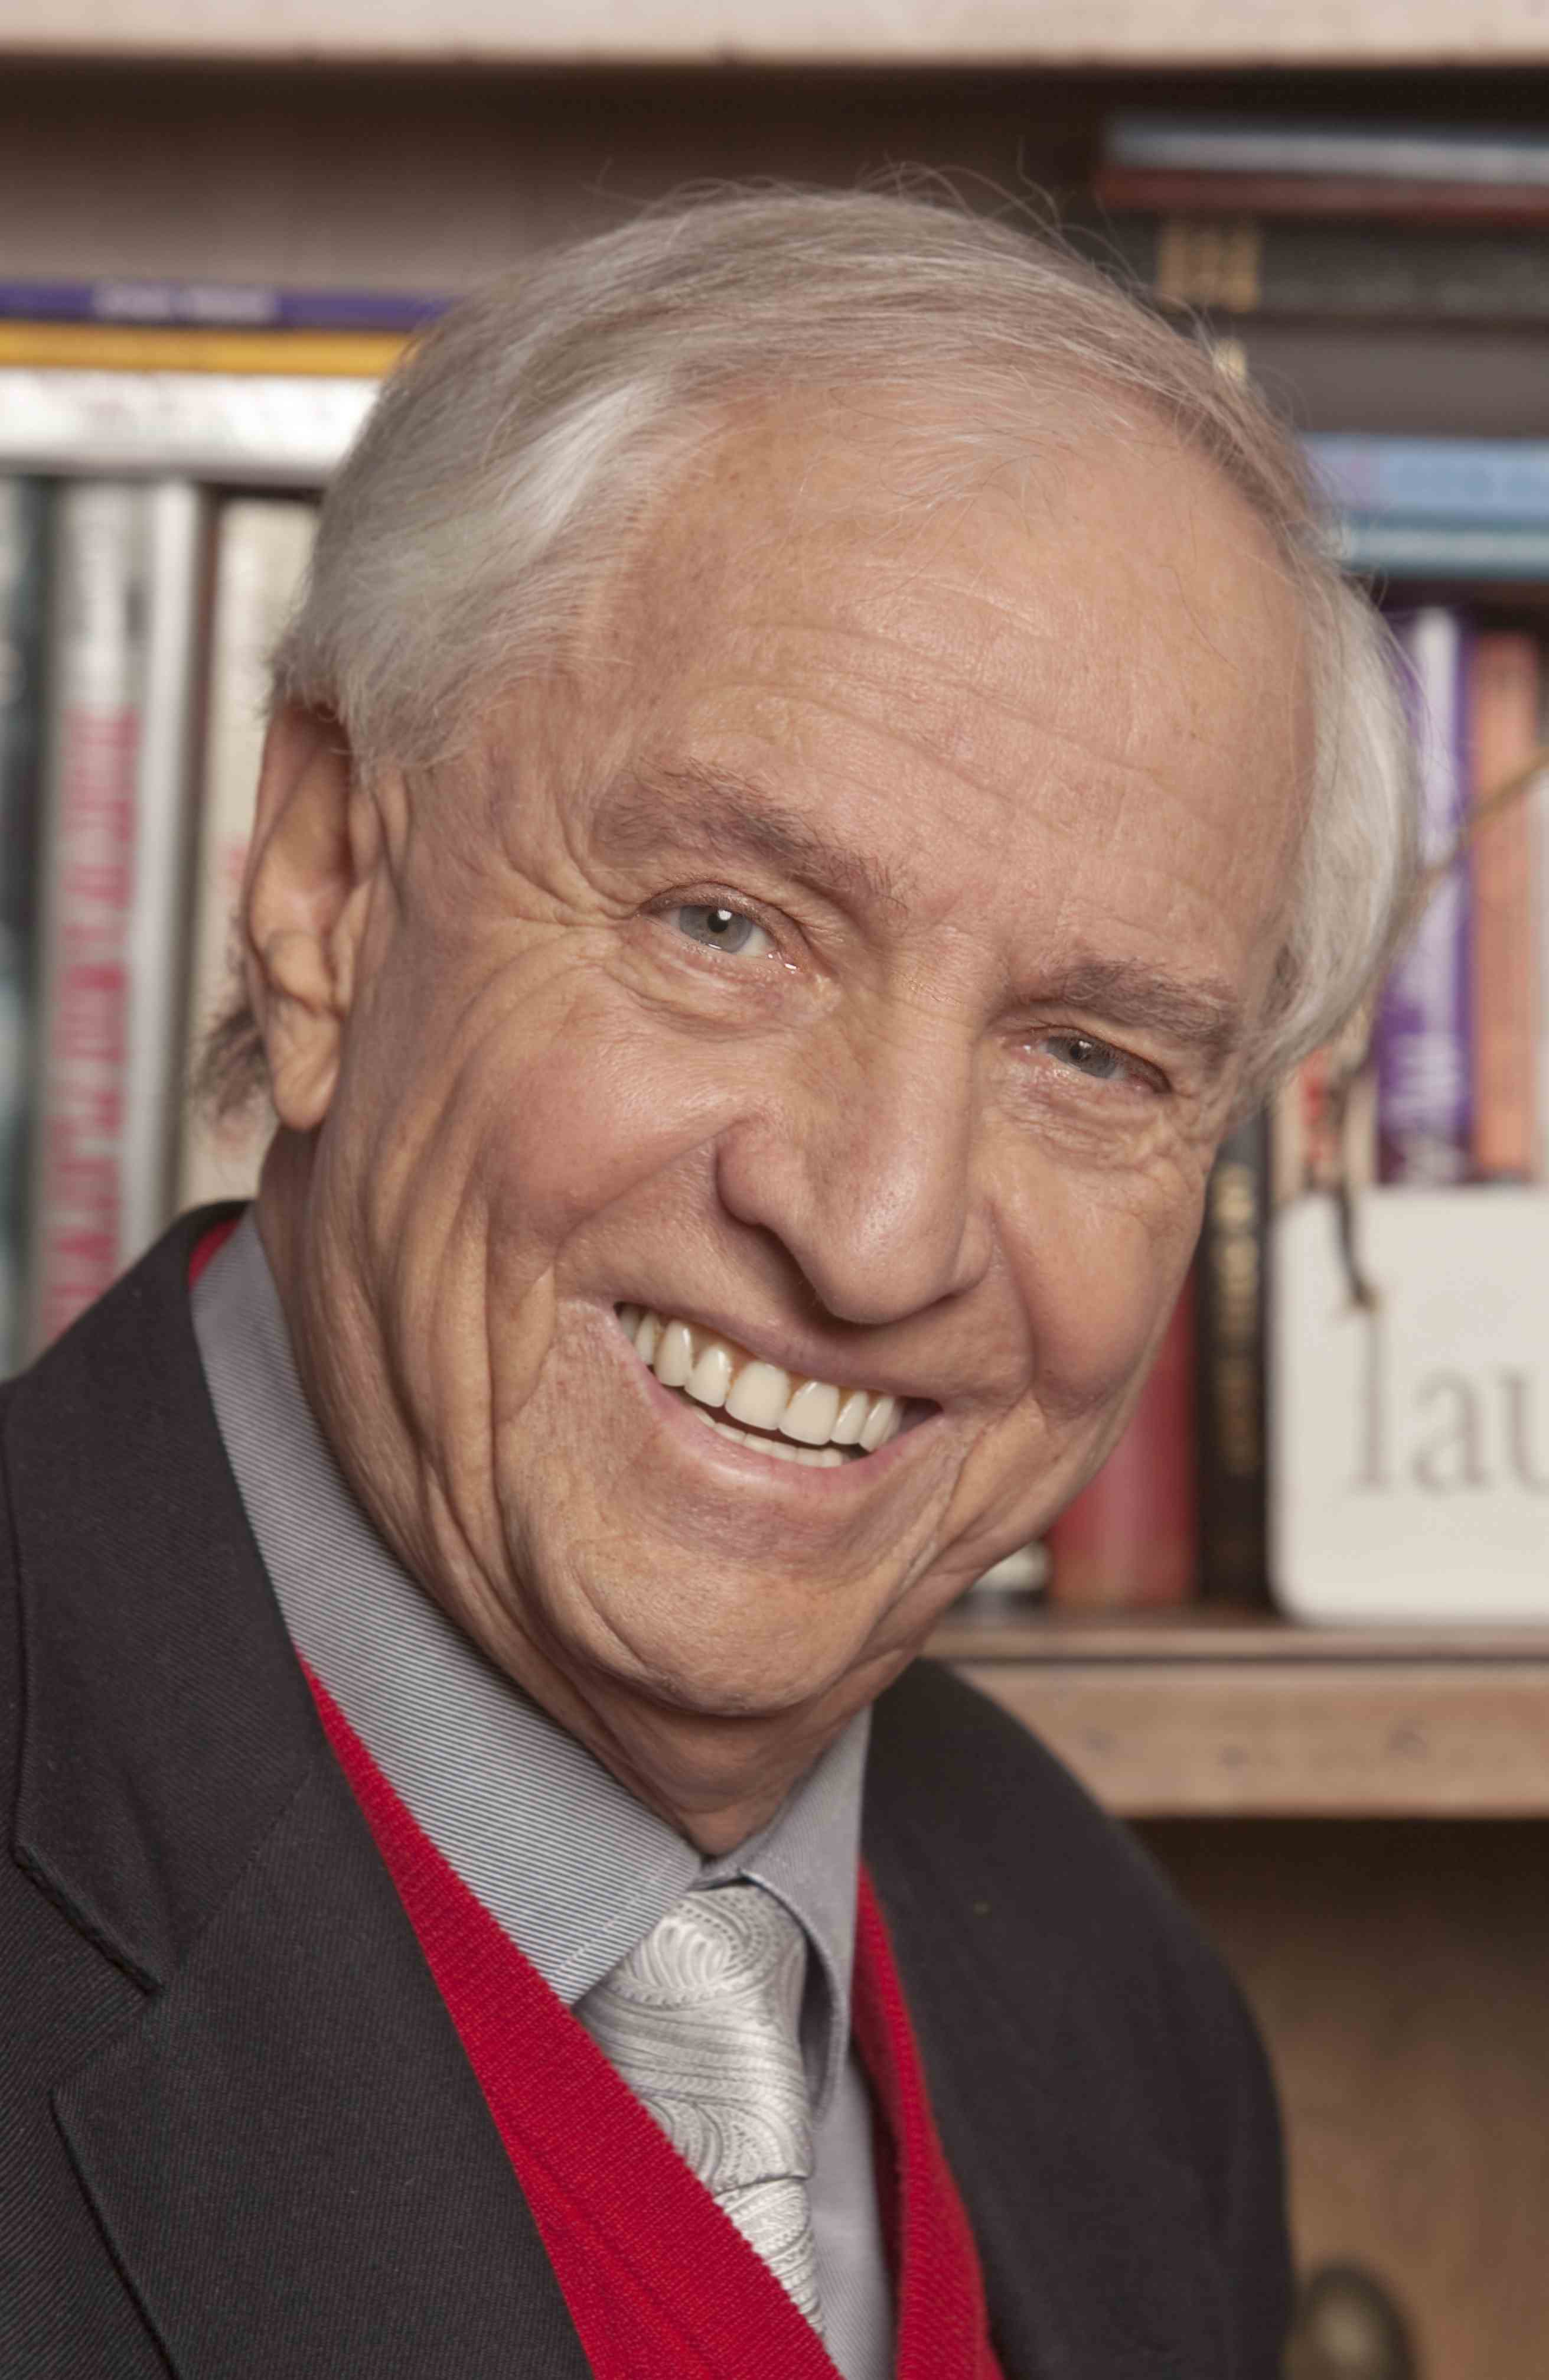 May 23 — An Evening with Garry Marshall in conversation with Sam Rubin | Live Talks Los Angeles - Garry-Marshall-headshot-small